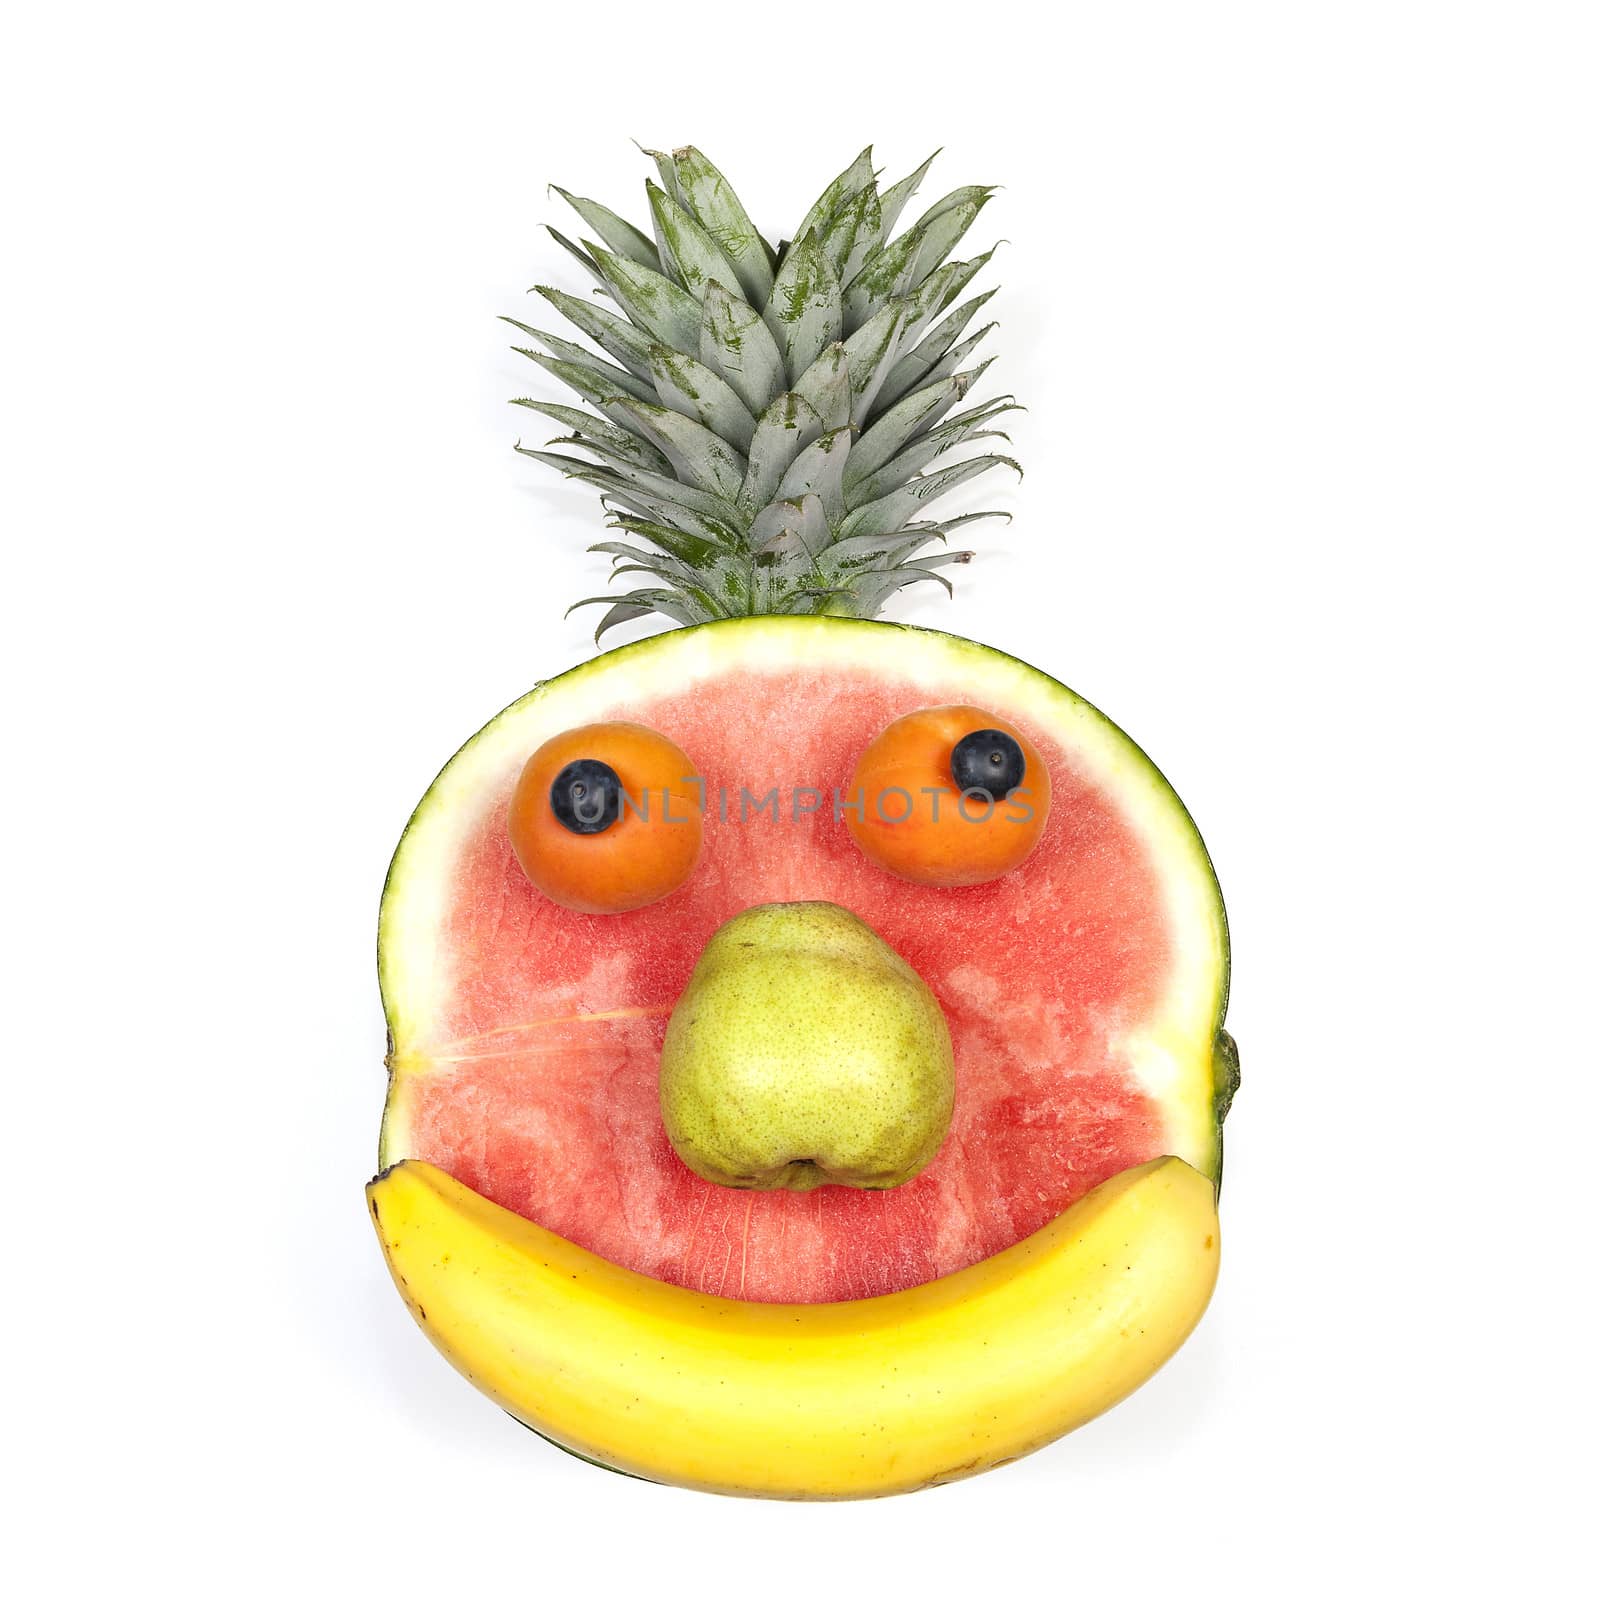 Funny fruit face by vwalakte